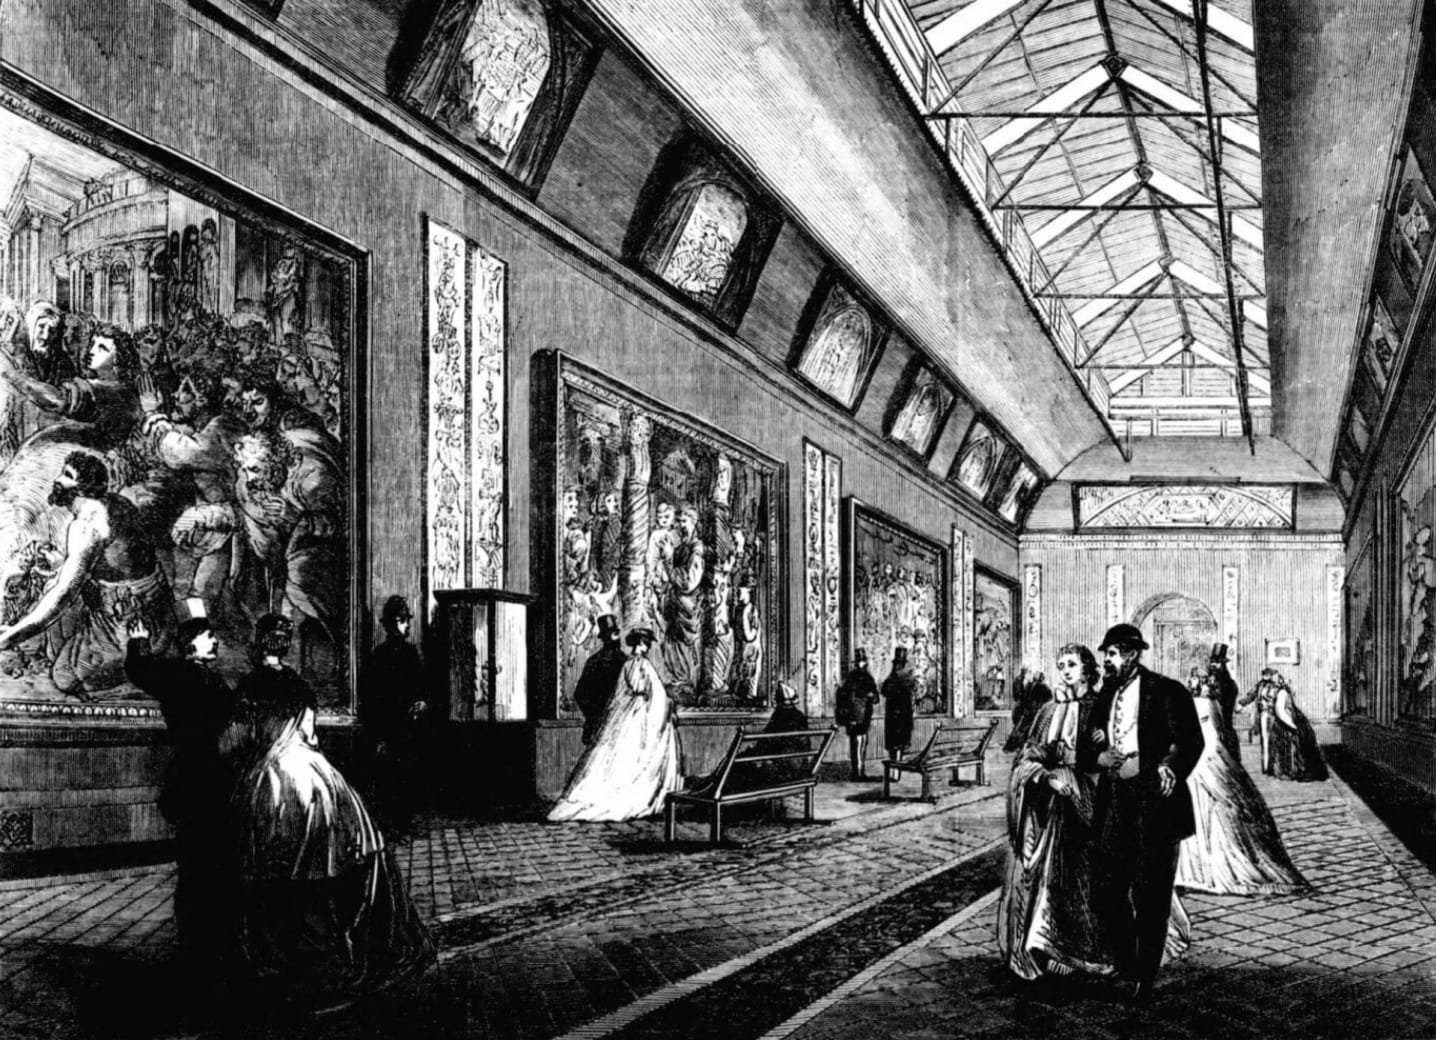 Engraving of the Raphael Gallery at the South Kensington Museum in 1865, with visitors walking and looking at the pictures.